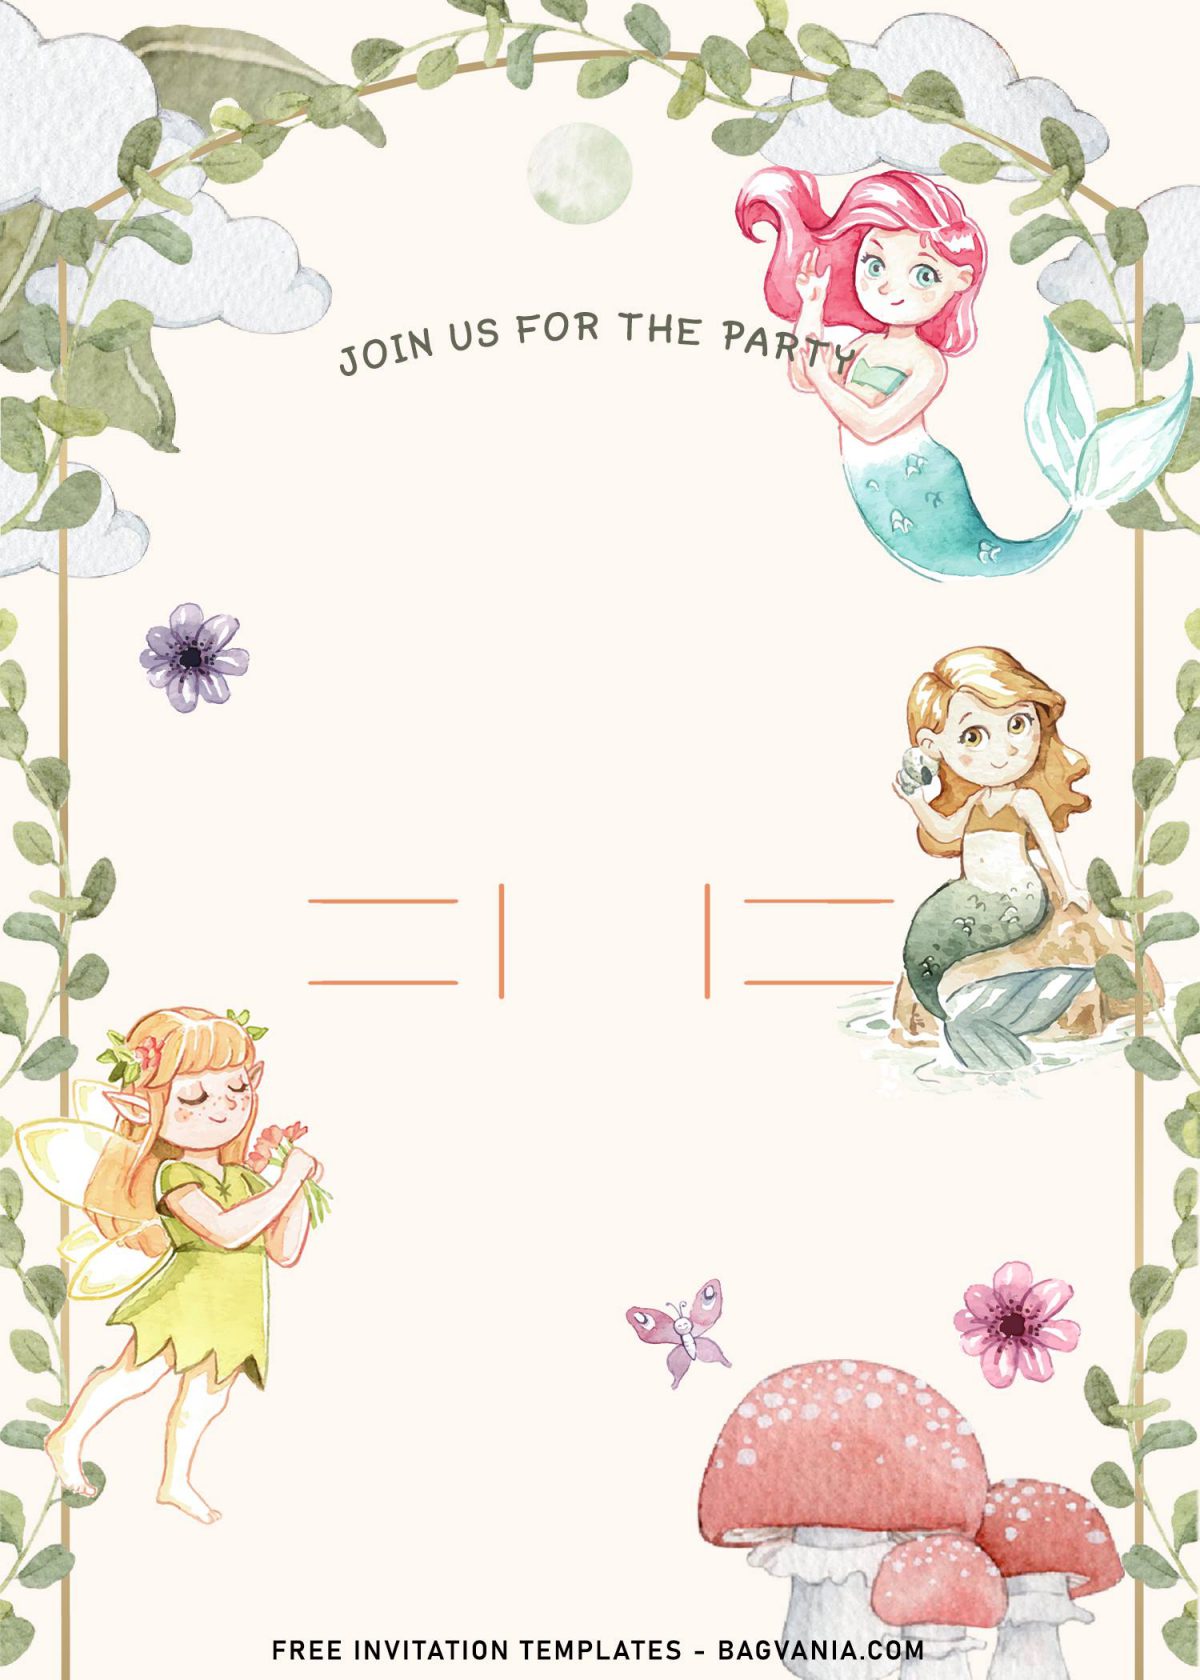 7+ Fairy Tale Birthday Invitation Templates and has greenery leaves